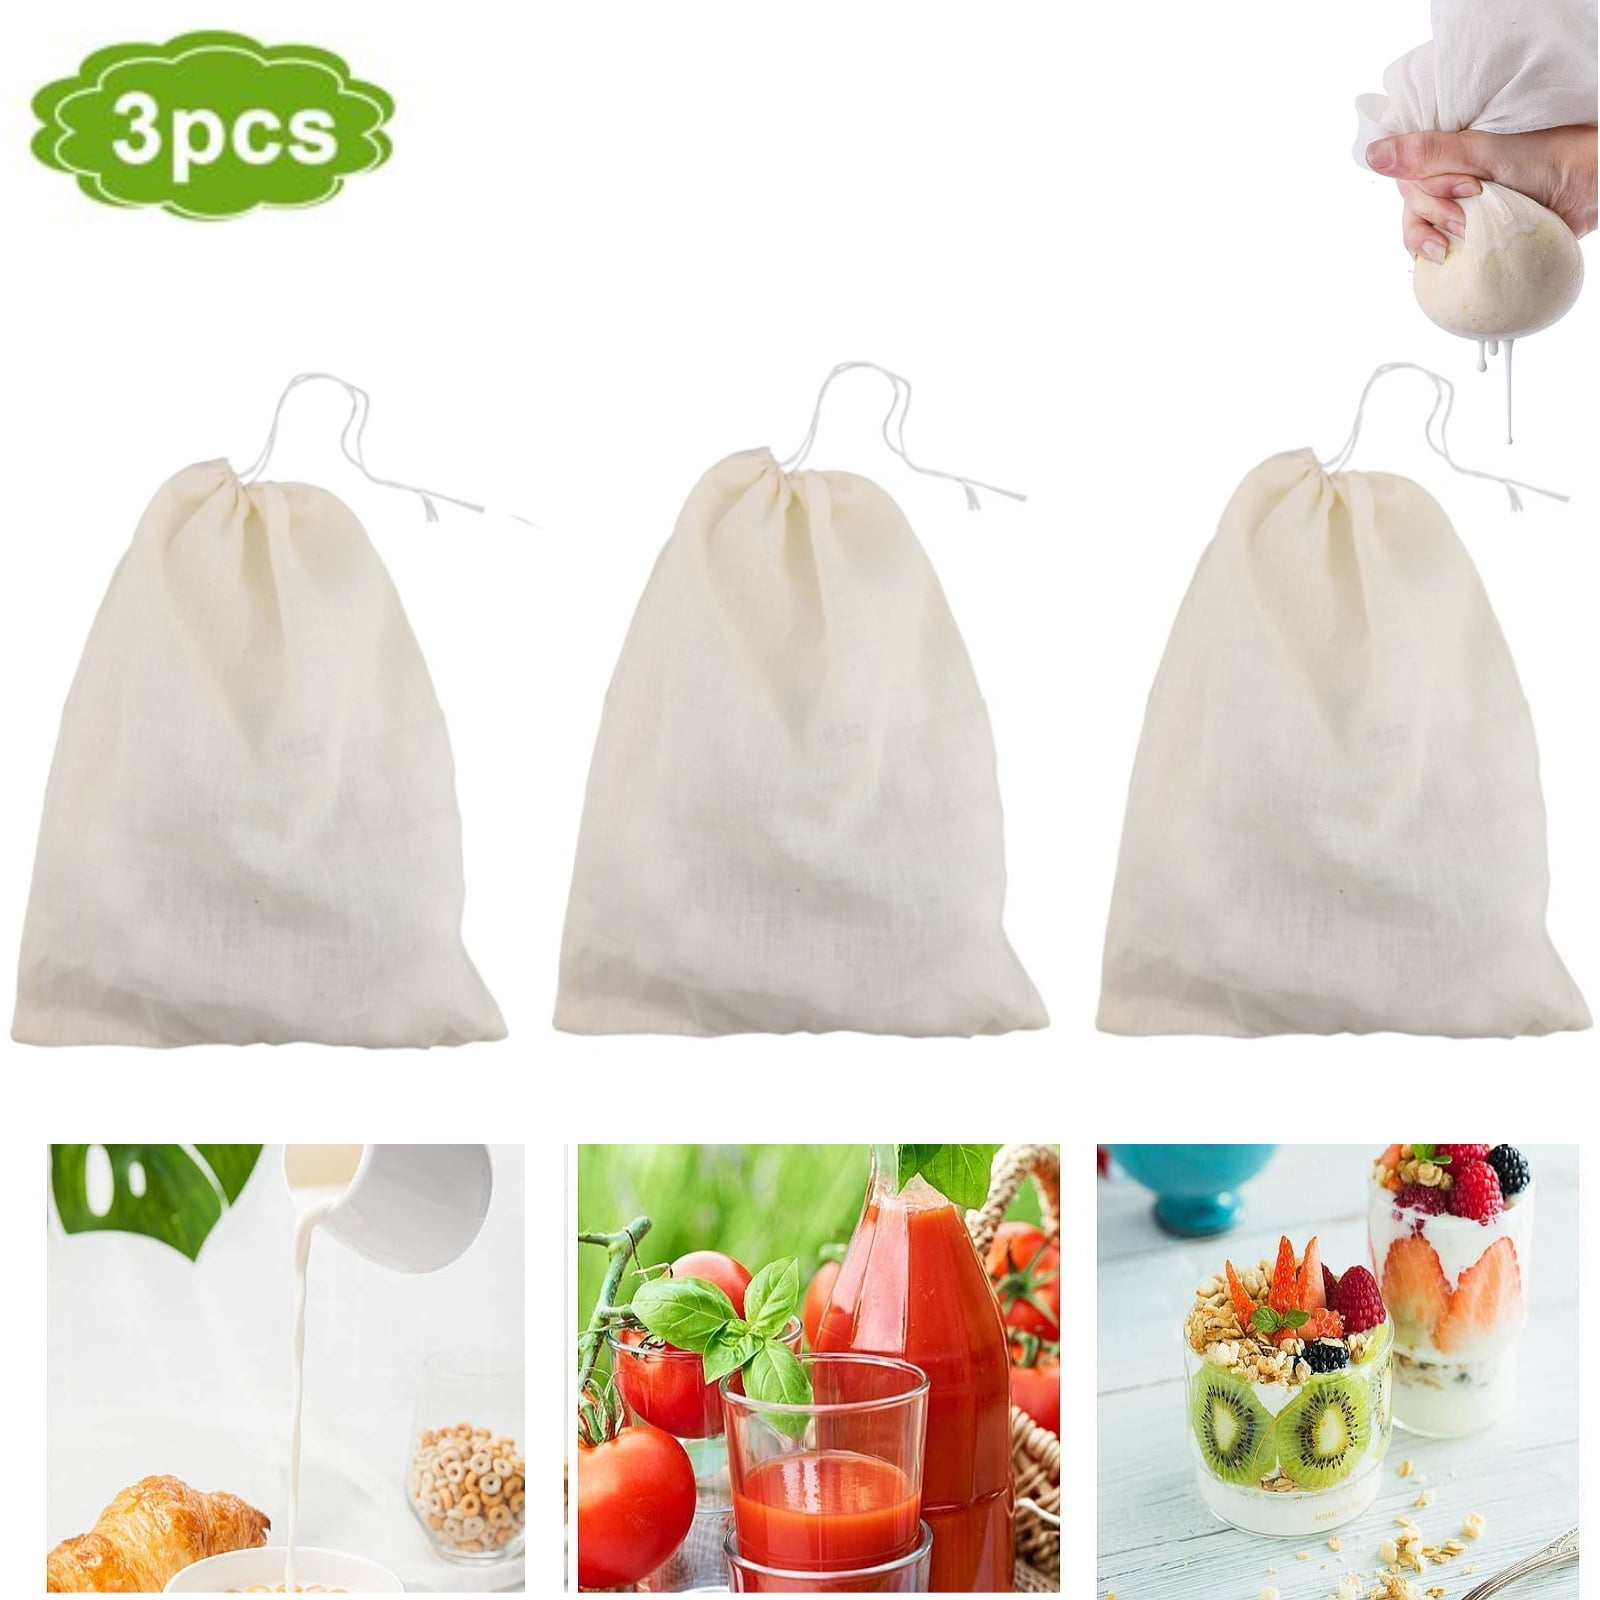 Cold Brew Coffee Filter Reusable Fine Mesh Cotton Nut Milk Cheese Cloth Bag 